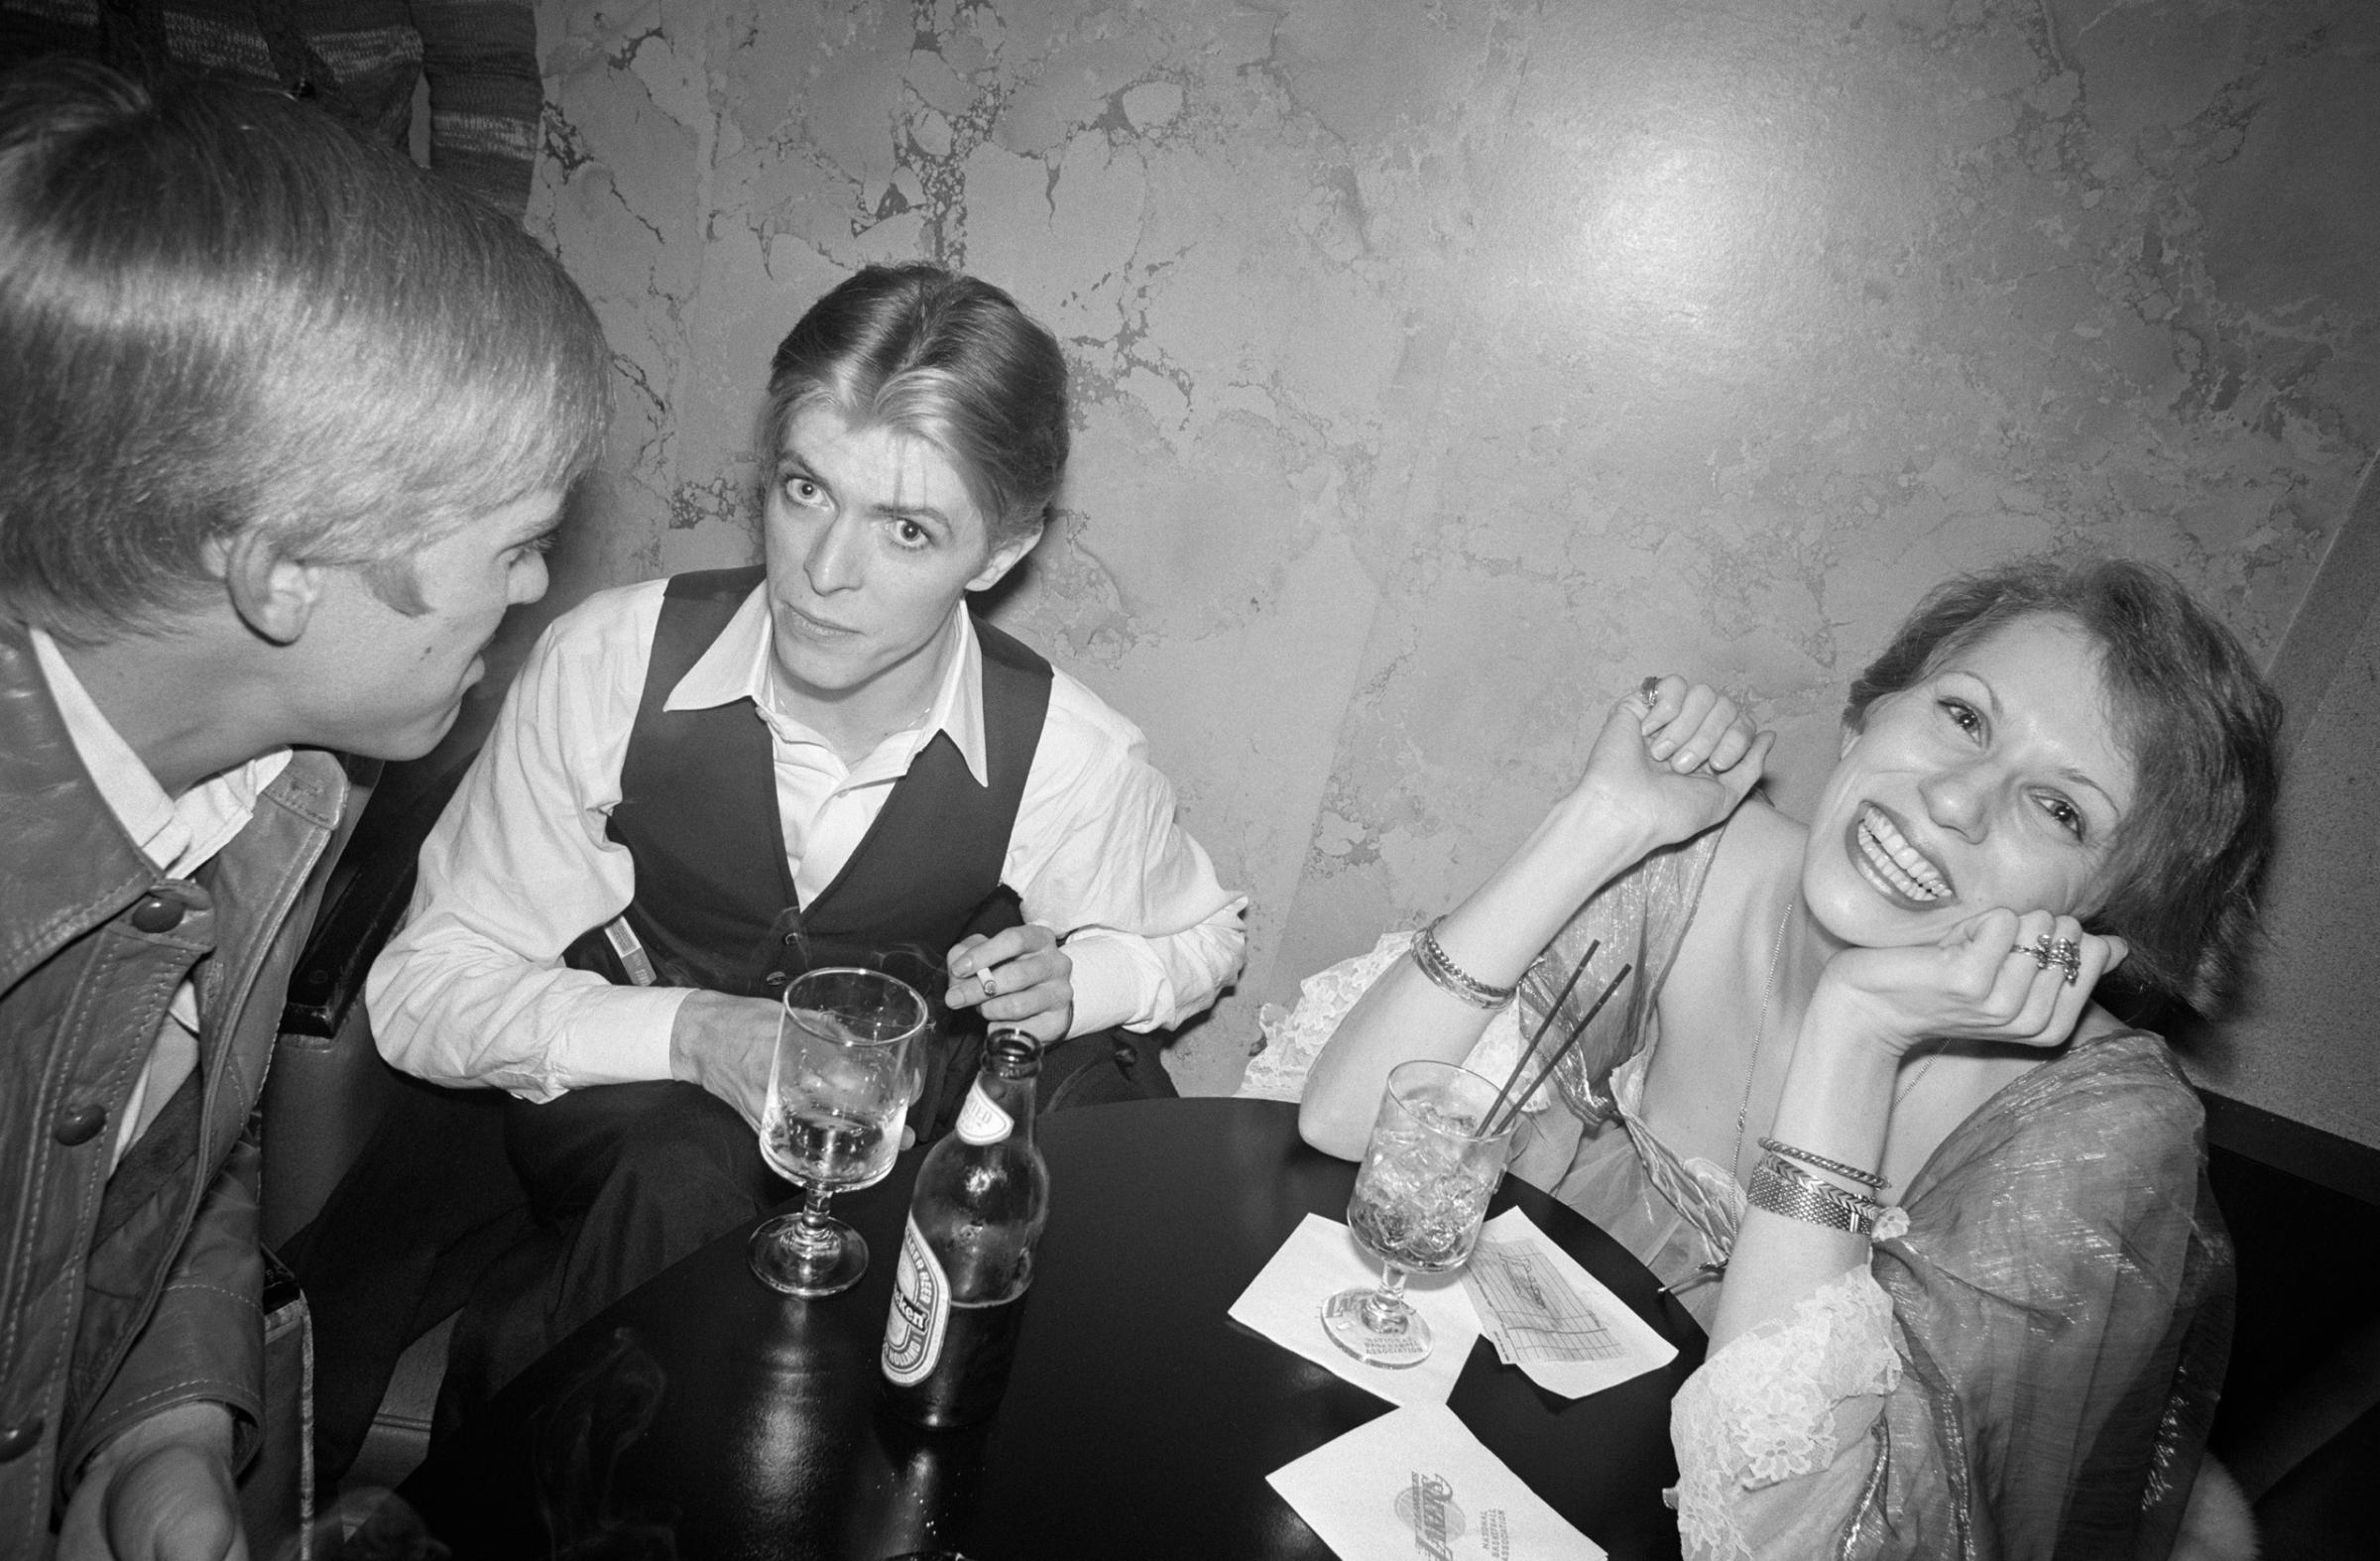 Bowie and his wife, Angela, with President Gerald Ford’s son, Steven, at a party in Los Angeles celebrating “Fame” being certified a gold record.